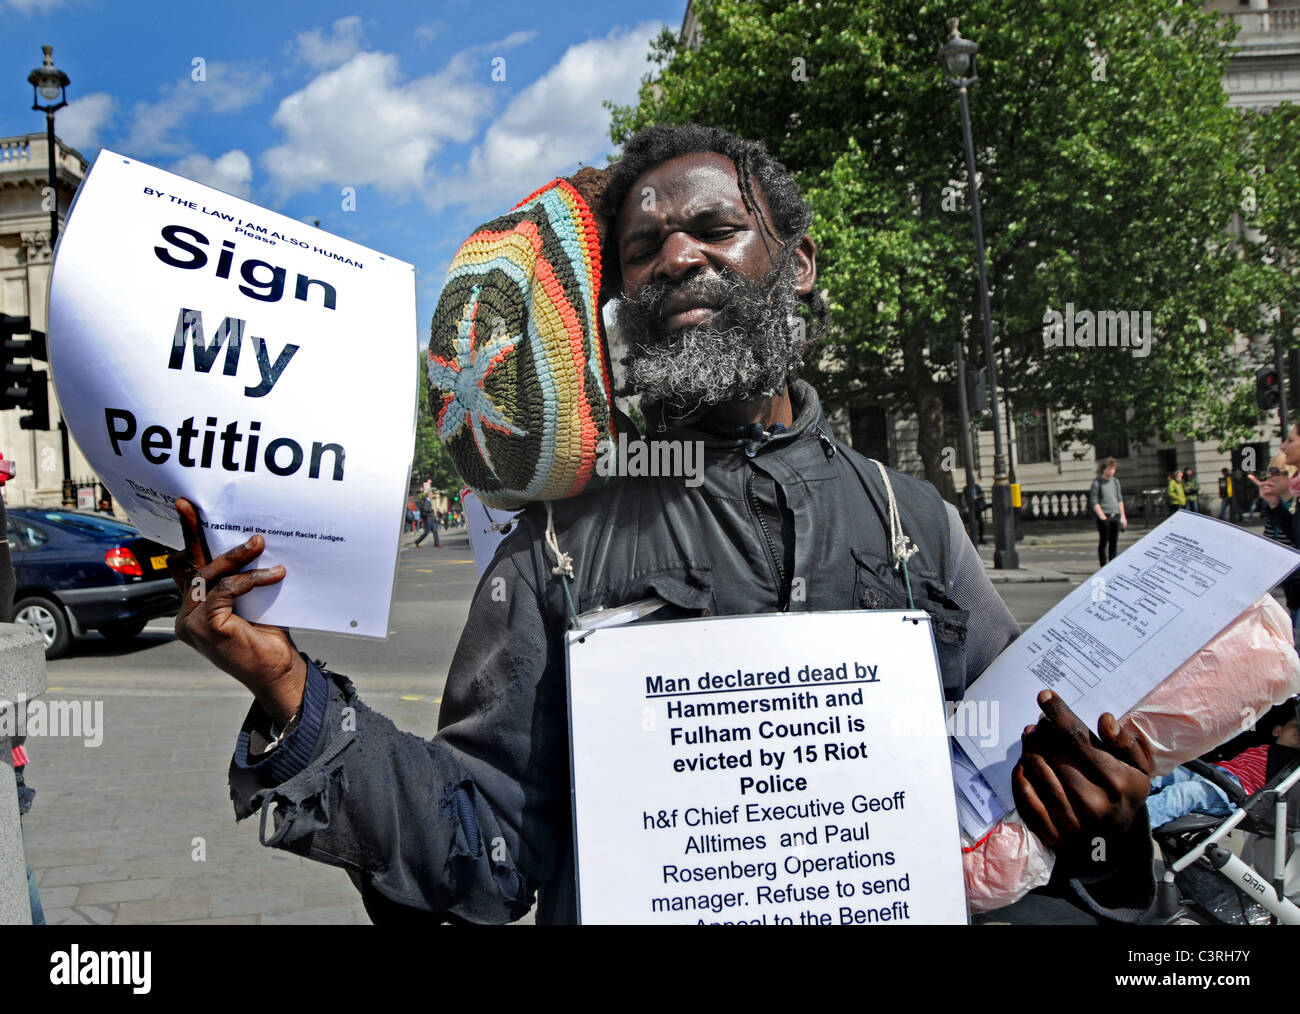 A man petitioning in Central London against racist treatment by a London Council. Stock Photo